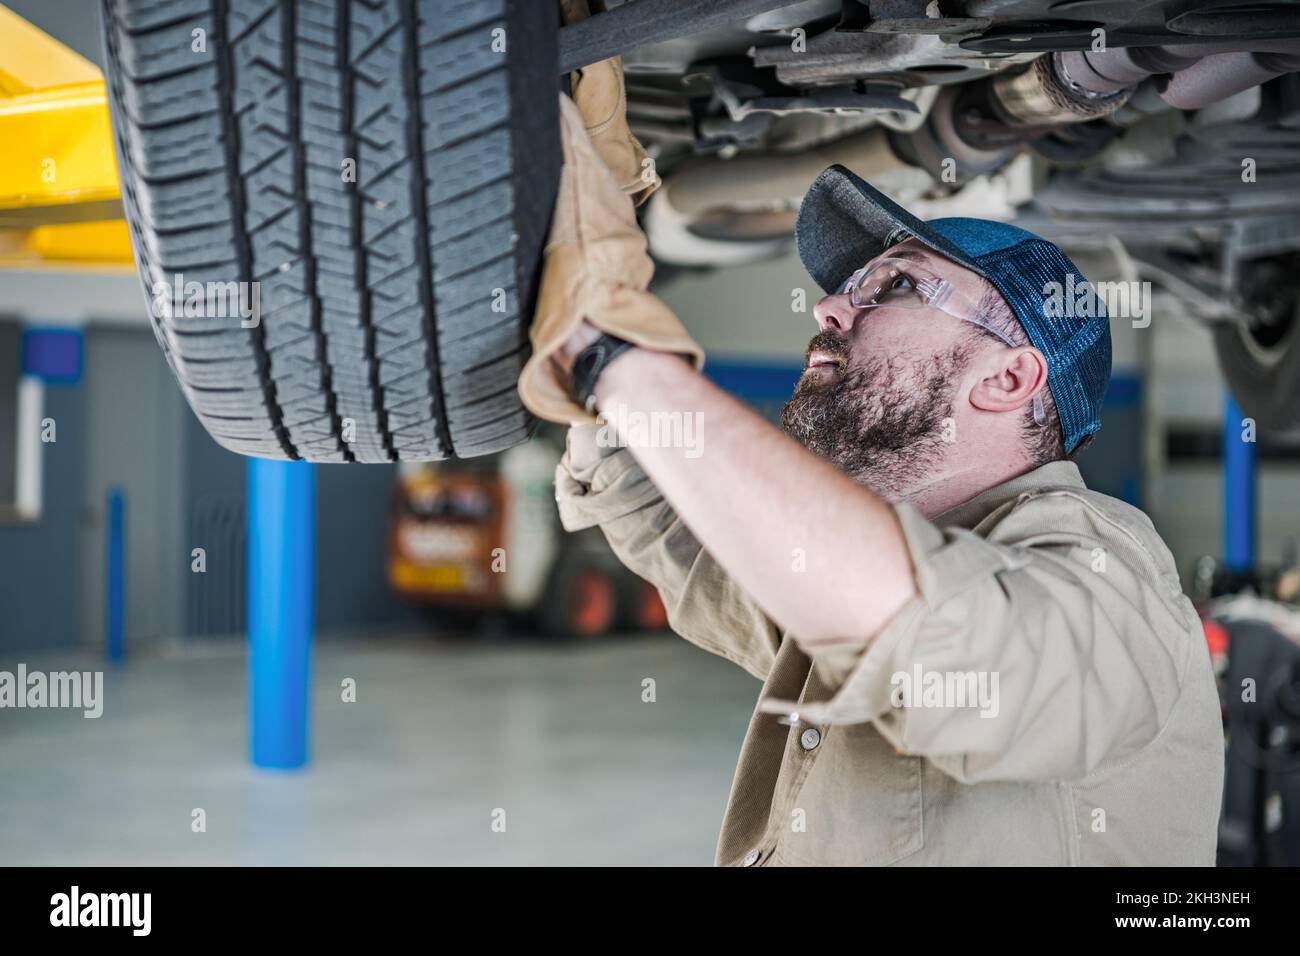 Caucasian Professional Automobile Mechanic Performing Car Suspension Safety Check. Vehicle Maintenance Theme. Stock Photo